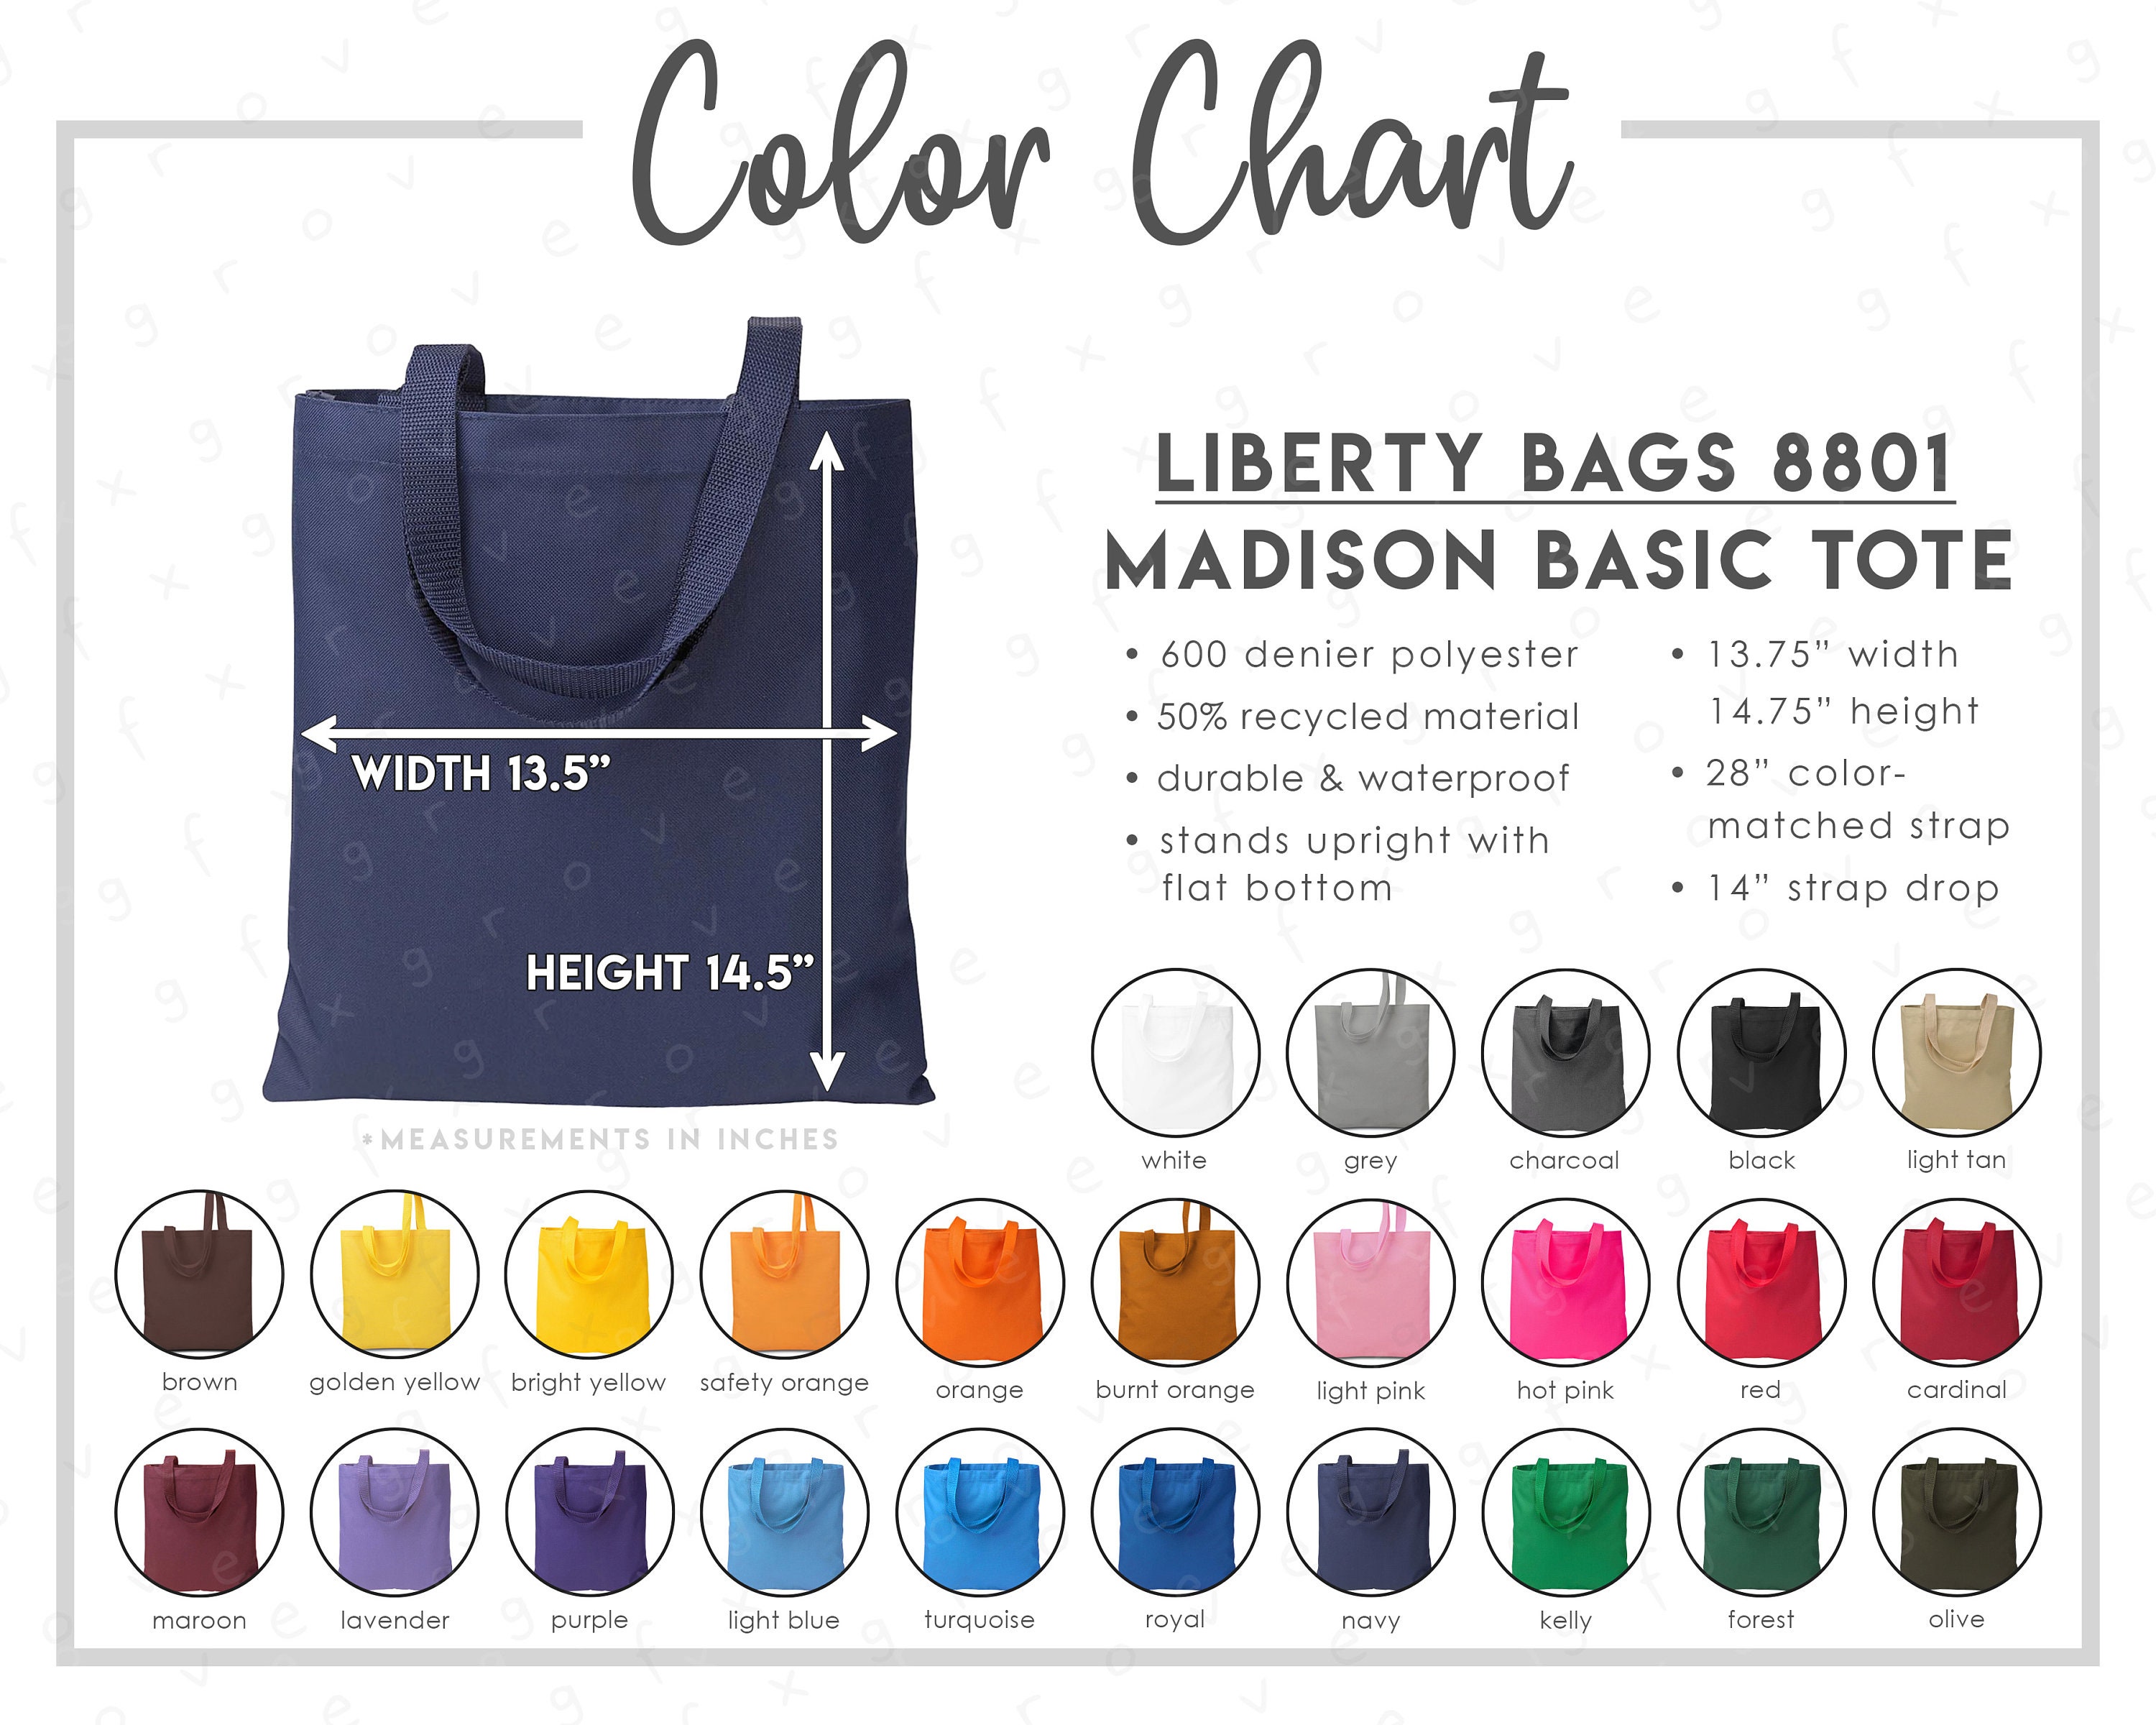 Tote Bag Size Chart AOP Tote Size Chart Sizing Chart for 